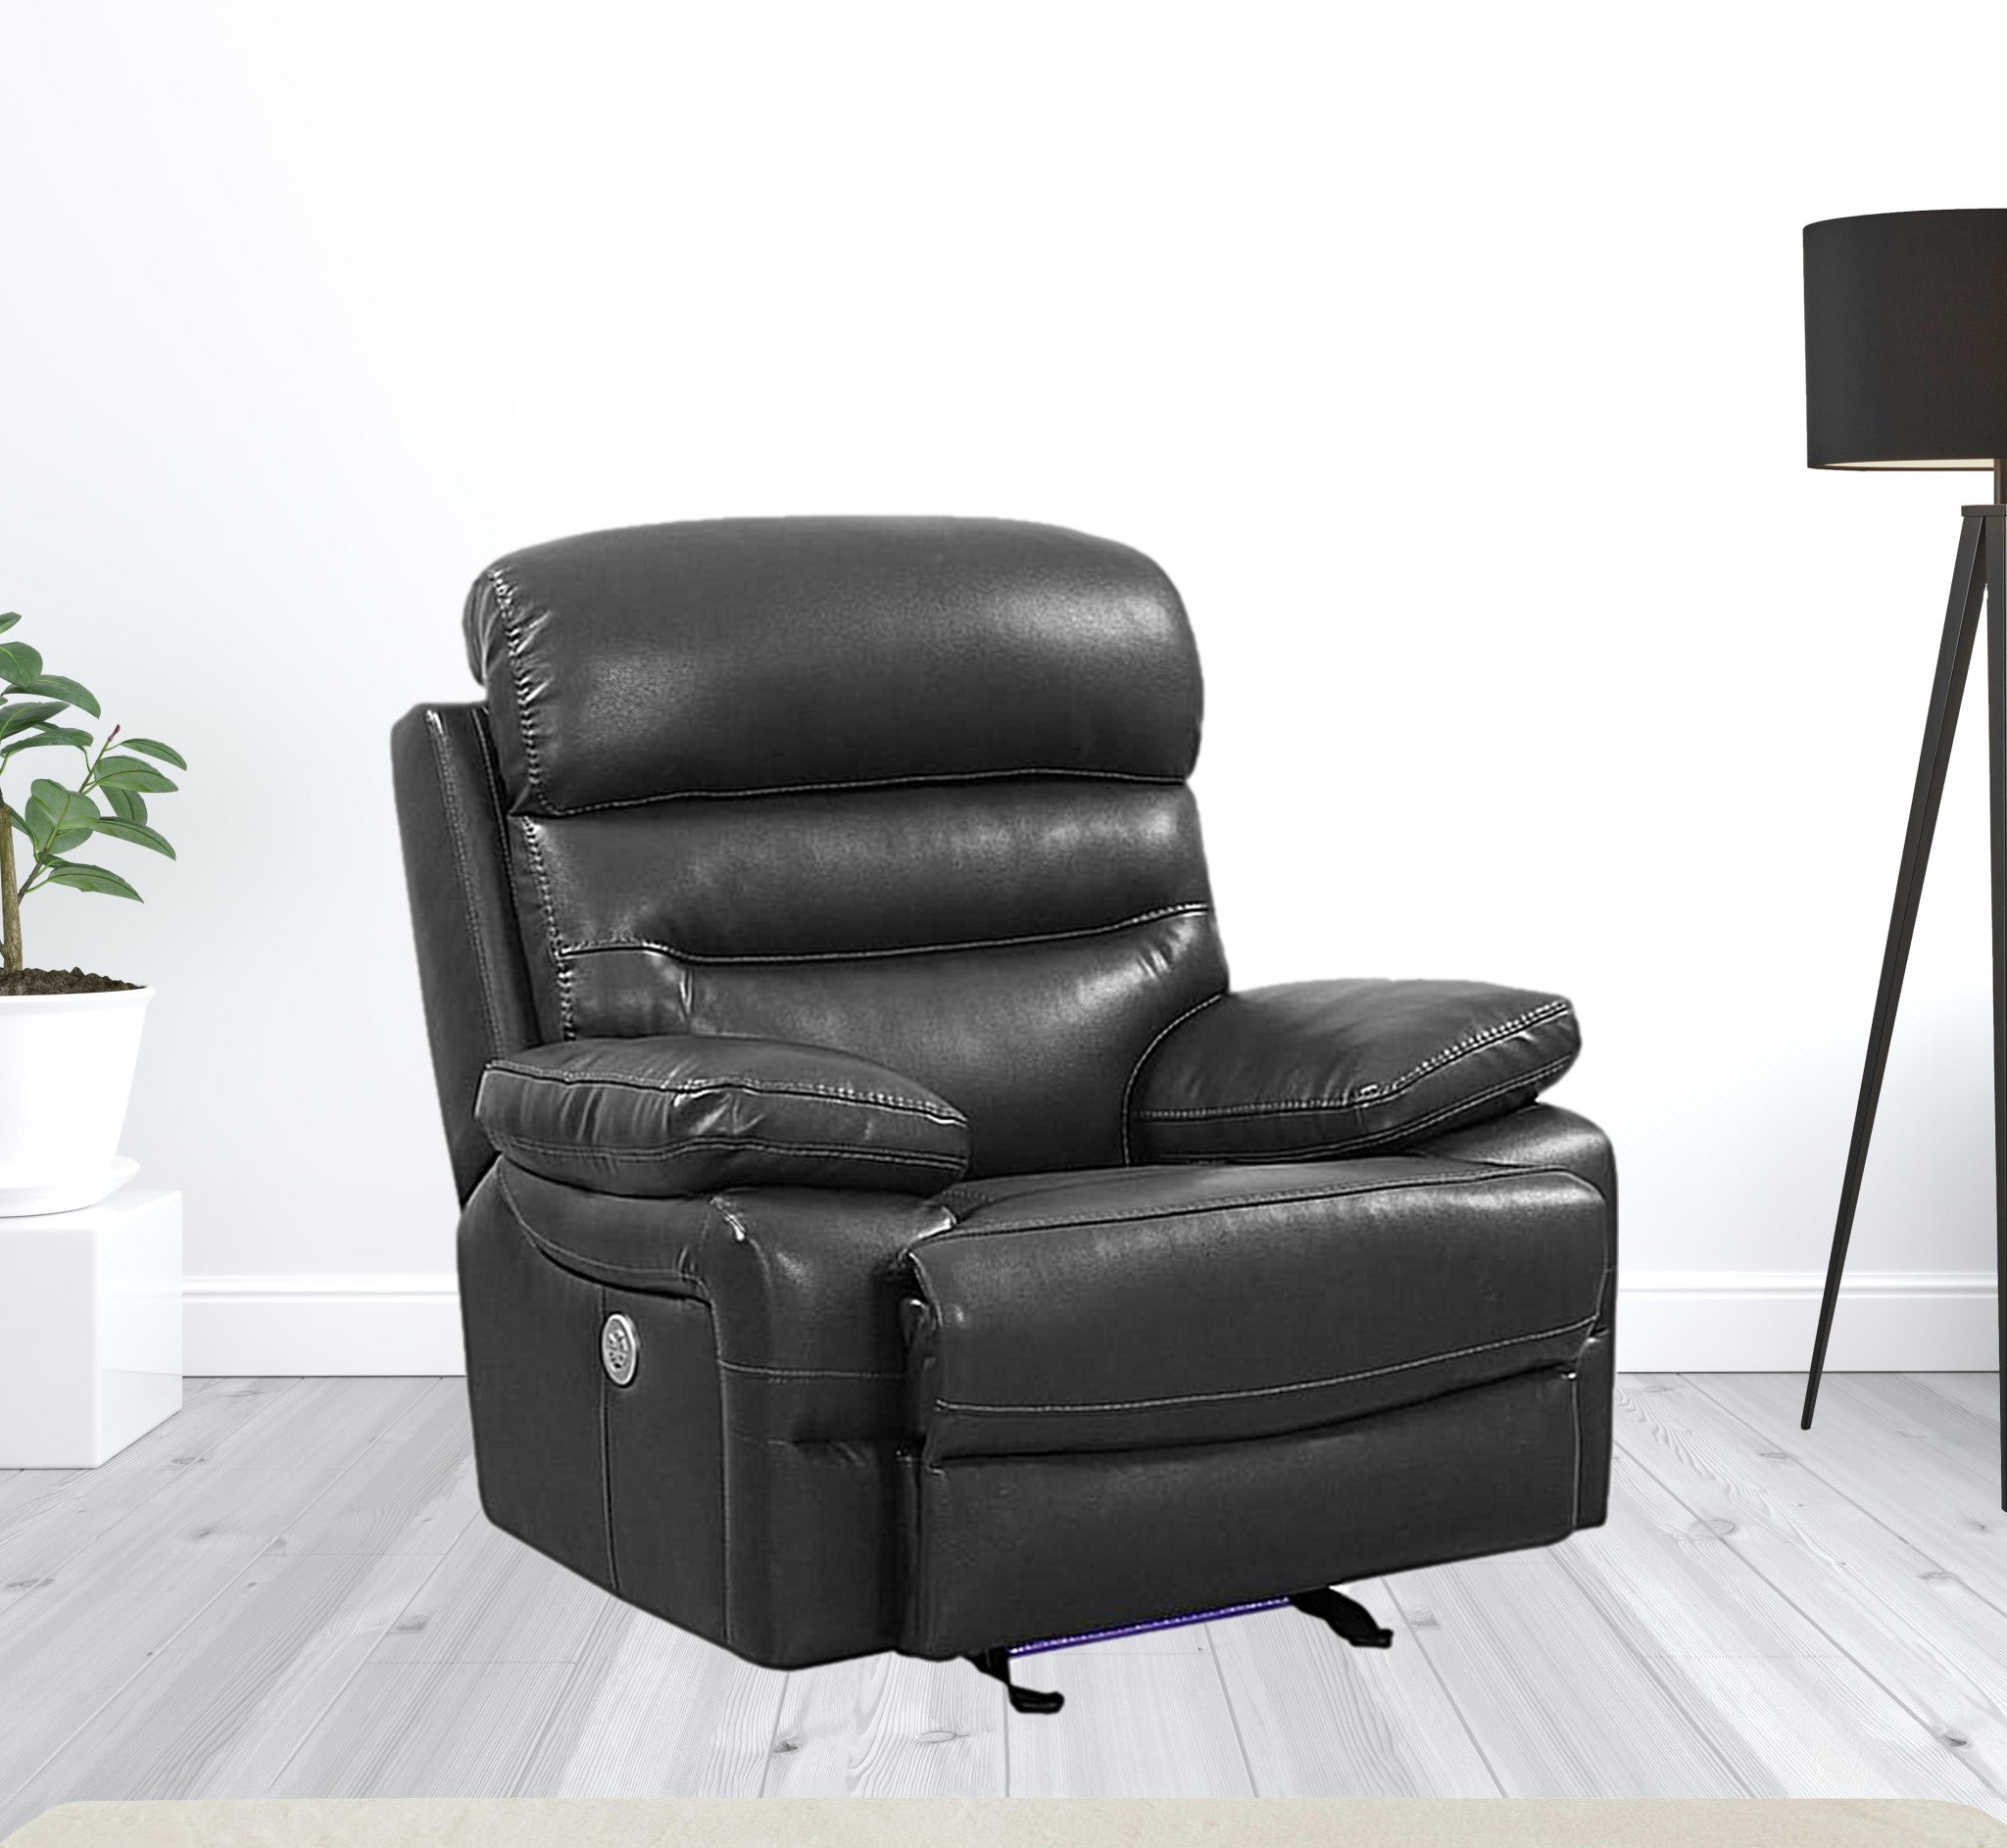 43" Grey Faux Leather Power Recliner Chair